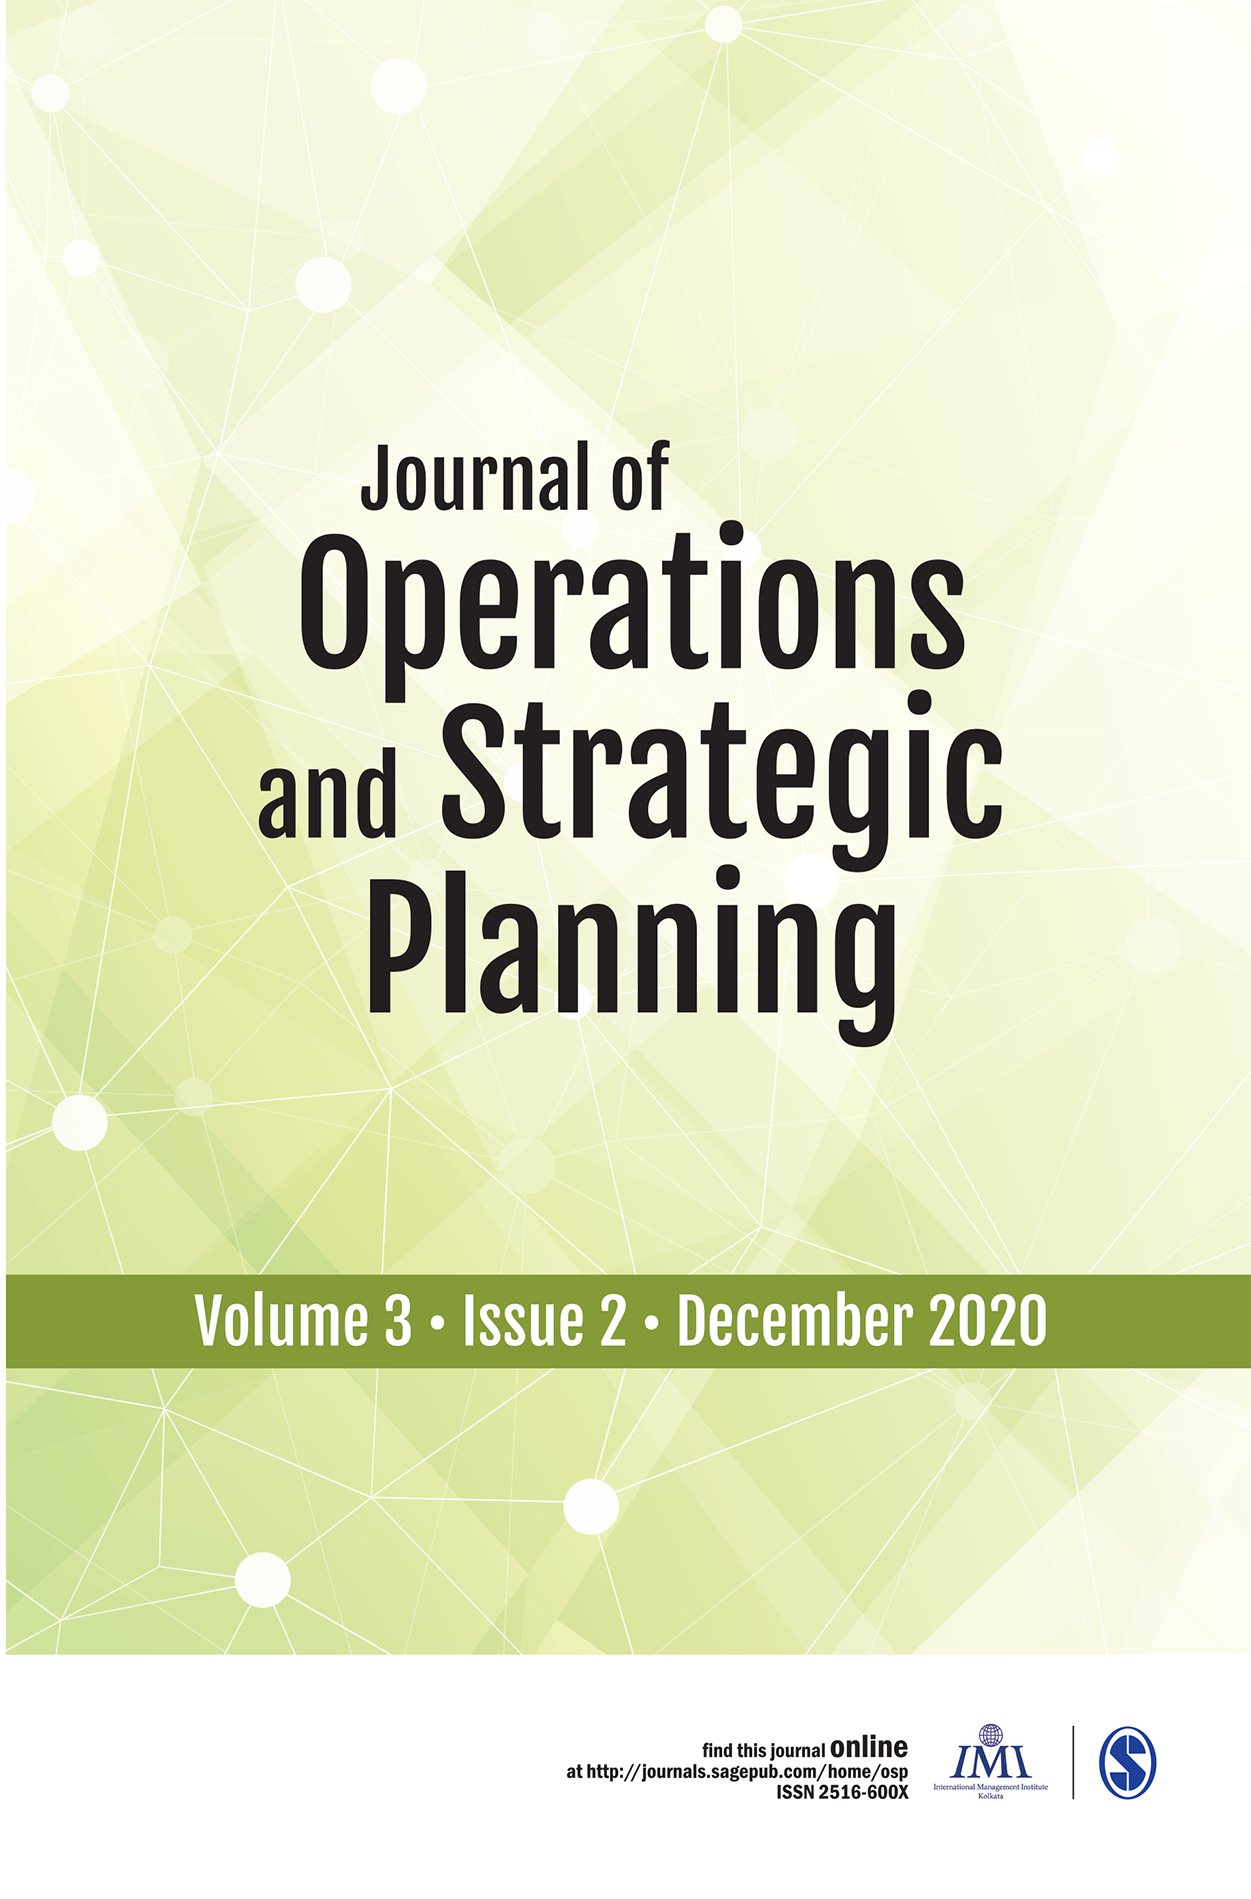 Journal of Operations and Strategic Planning